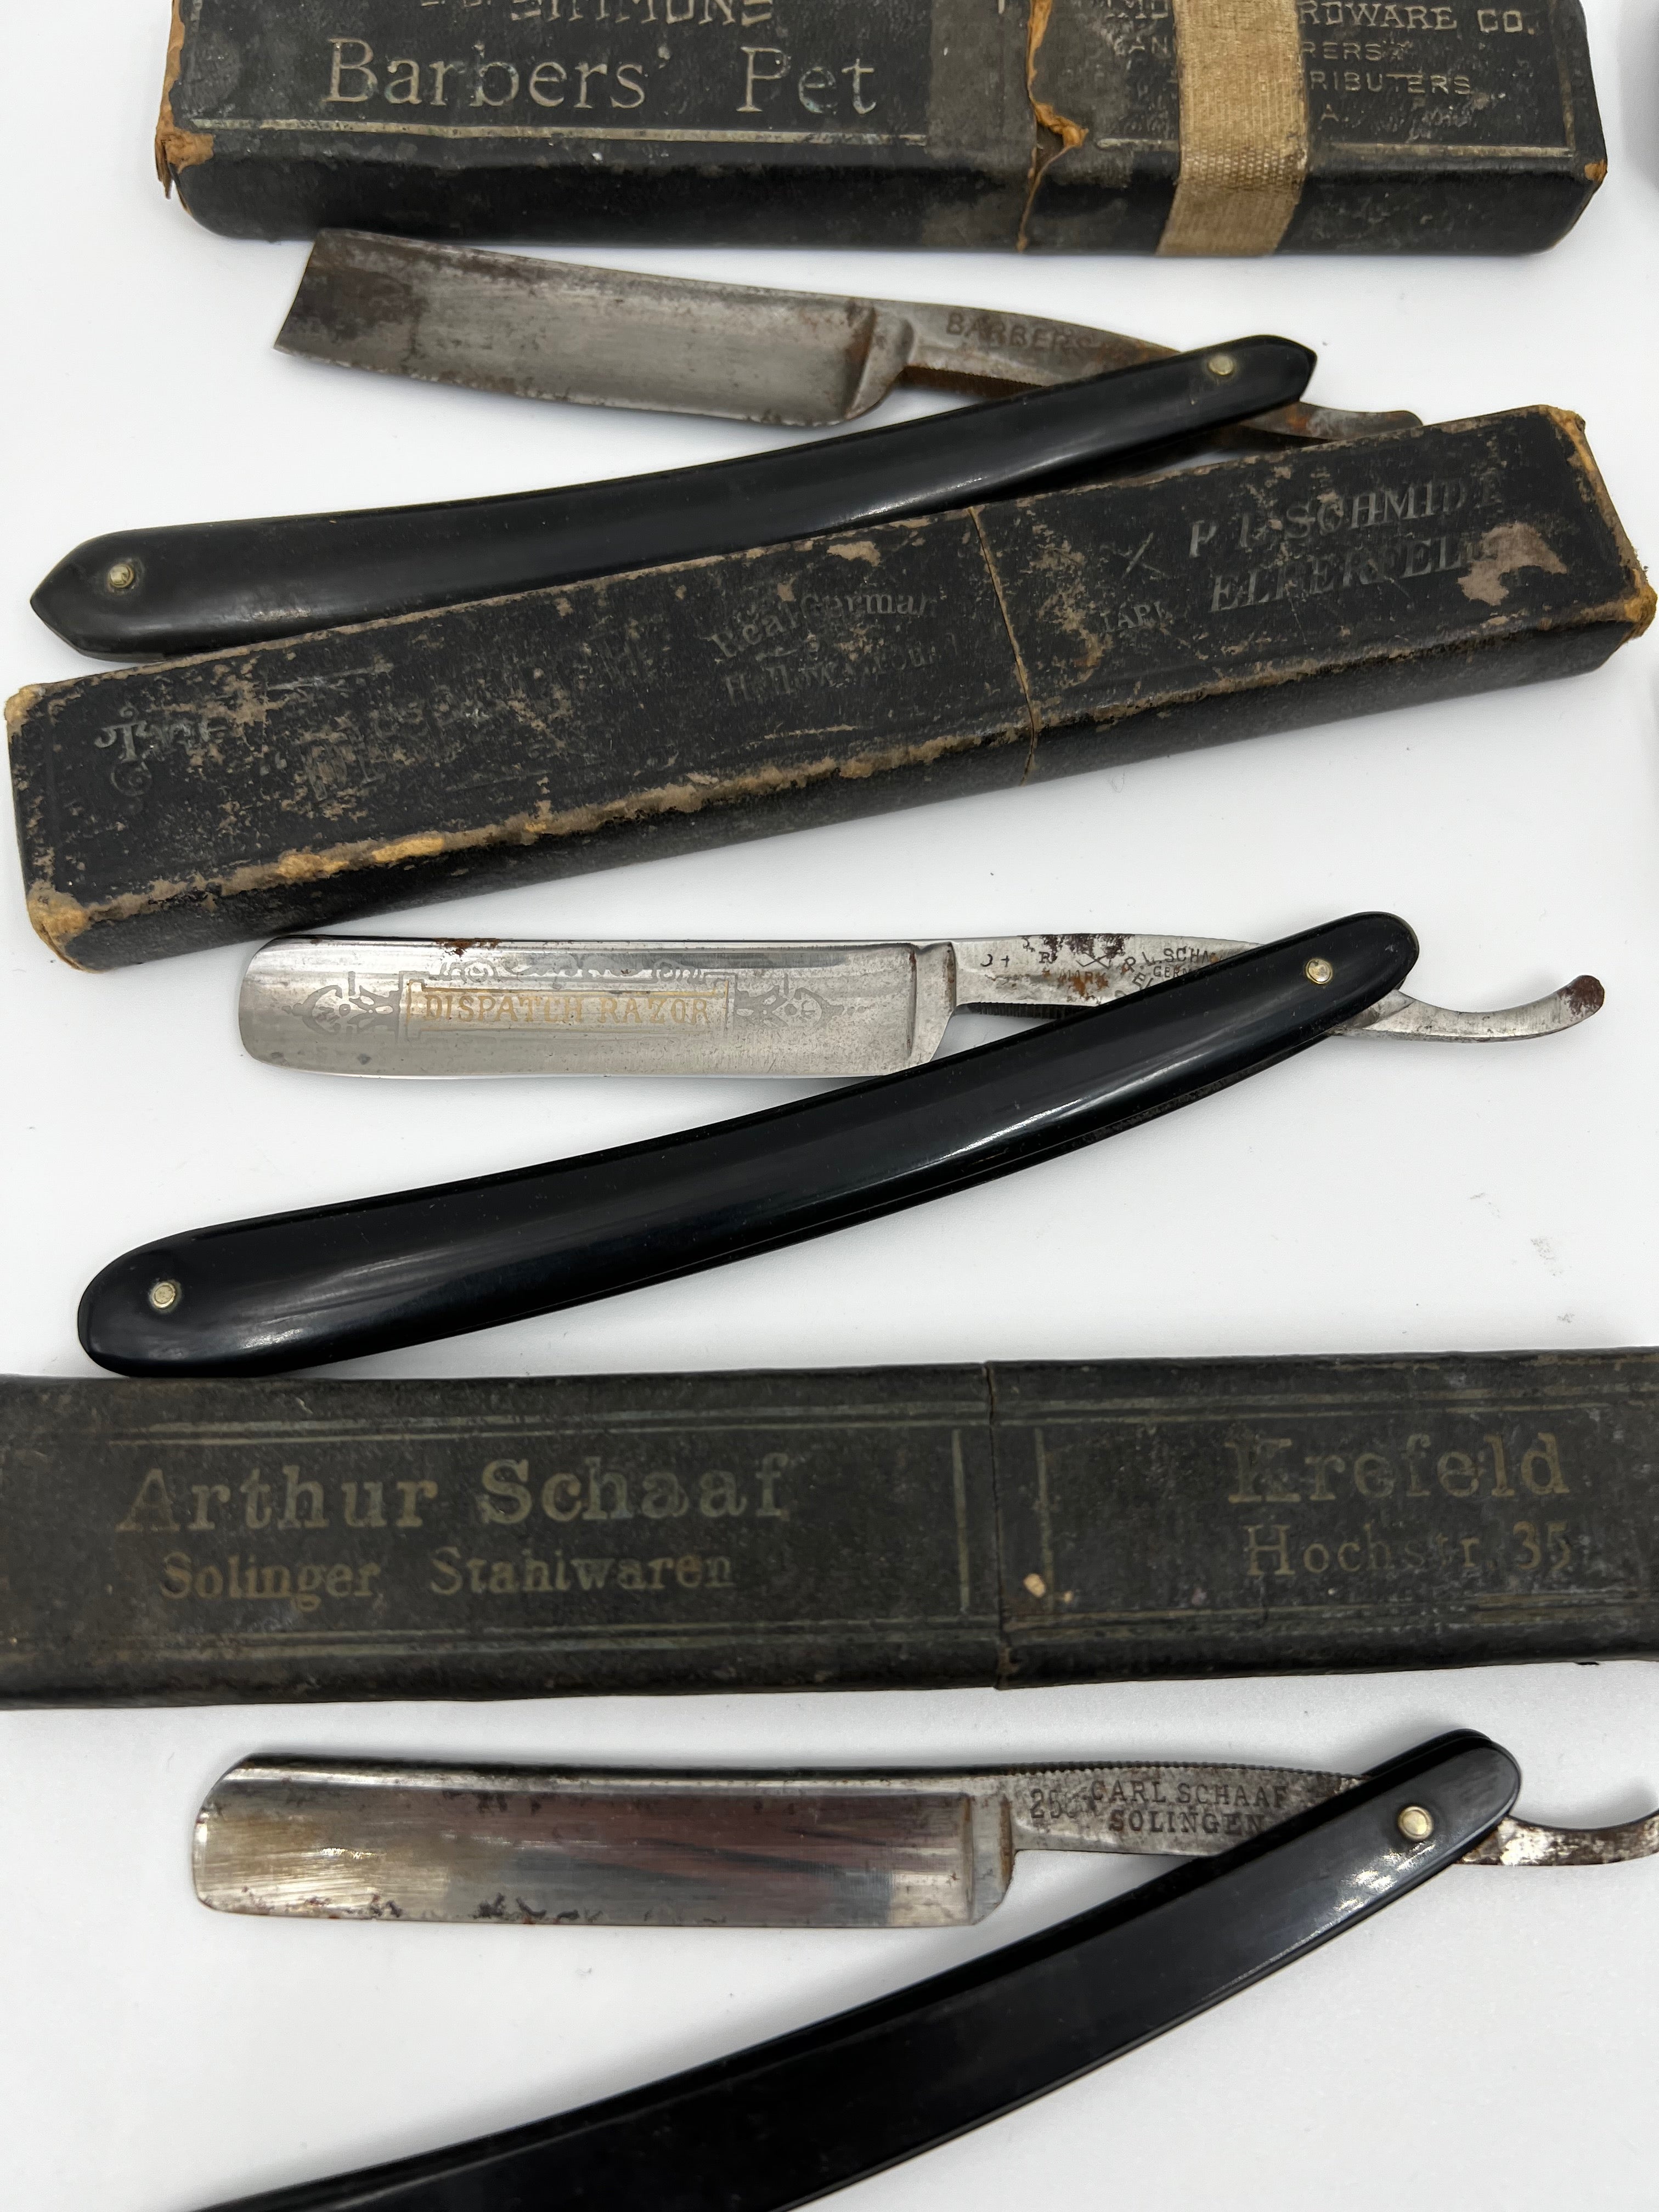 Vintage 10 Straight Razor Lot #28 - May Contain Sheffield, Solingen, Japanese & USA makers, as pictured